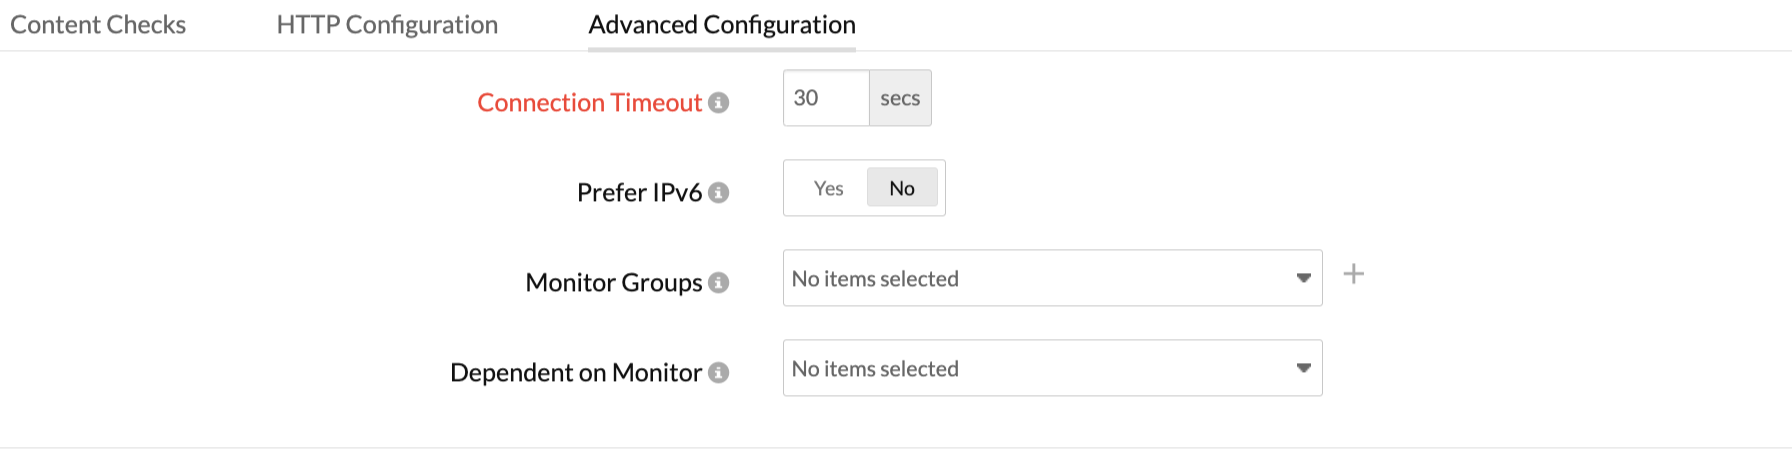 Configure connection timeout, monitor groups, and more.